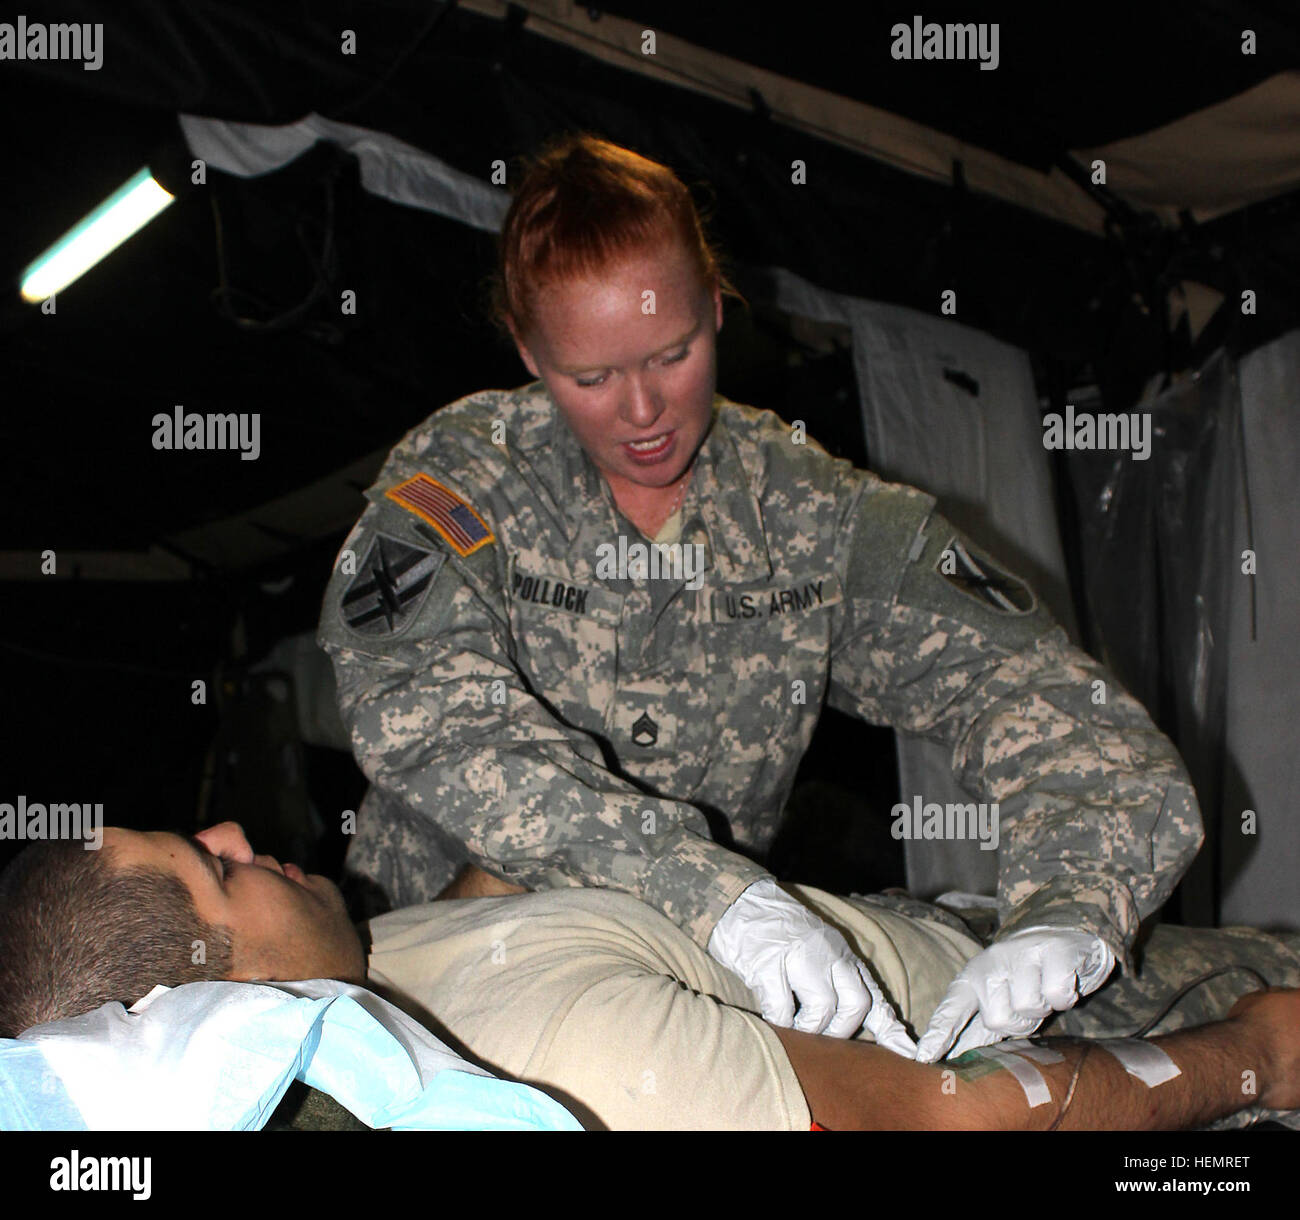 As the medical readiness noncommissioned officer in charge, Staff Sgt. Rebecca Pollock talks her heat casualty patient through an intravenous therapy to correct electrolyte imbalances. Nine female Georgia Guardsmen have been selected to integrate into combat related positions that were formerly all male. Pollock, a combat medic, will be one of those chosen to join the ranks of the 48th Infantry Brigade Combat Team line companies. The 48th IBCT is one of nine Army National Guard infantry brigades to receive the authorization for assigning women to their maneuver battalions. 'I know a lot of the Stock Photo